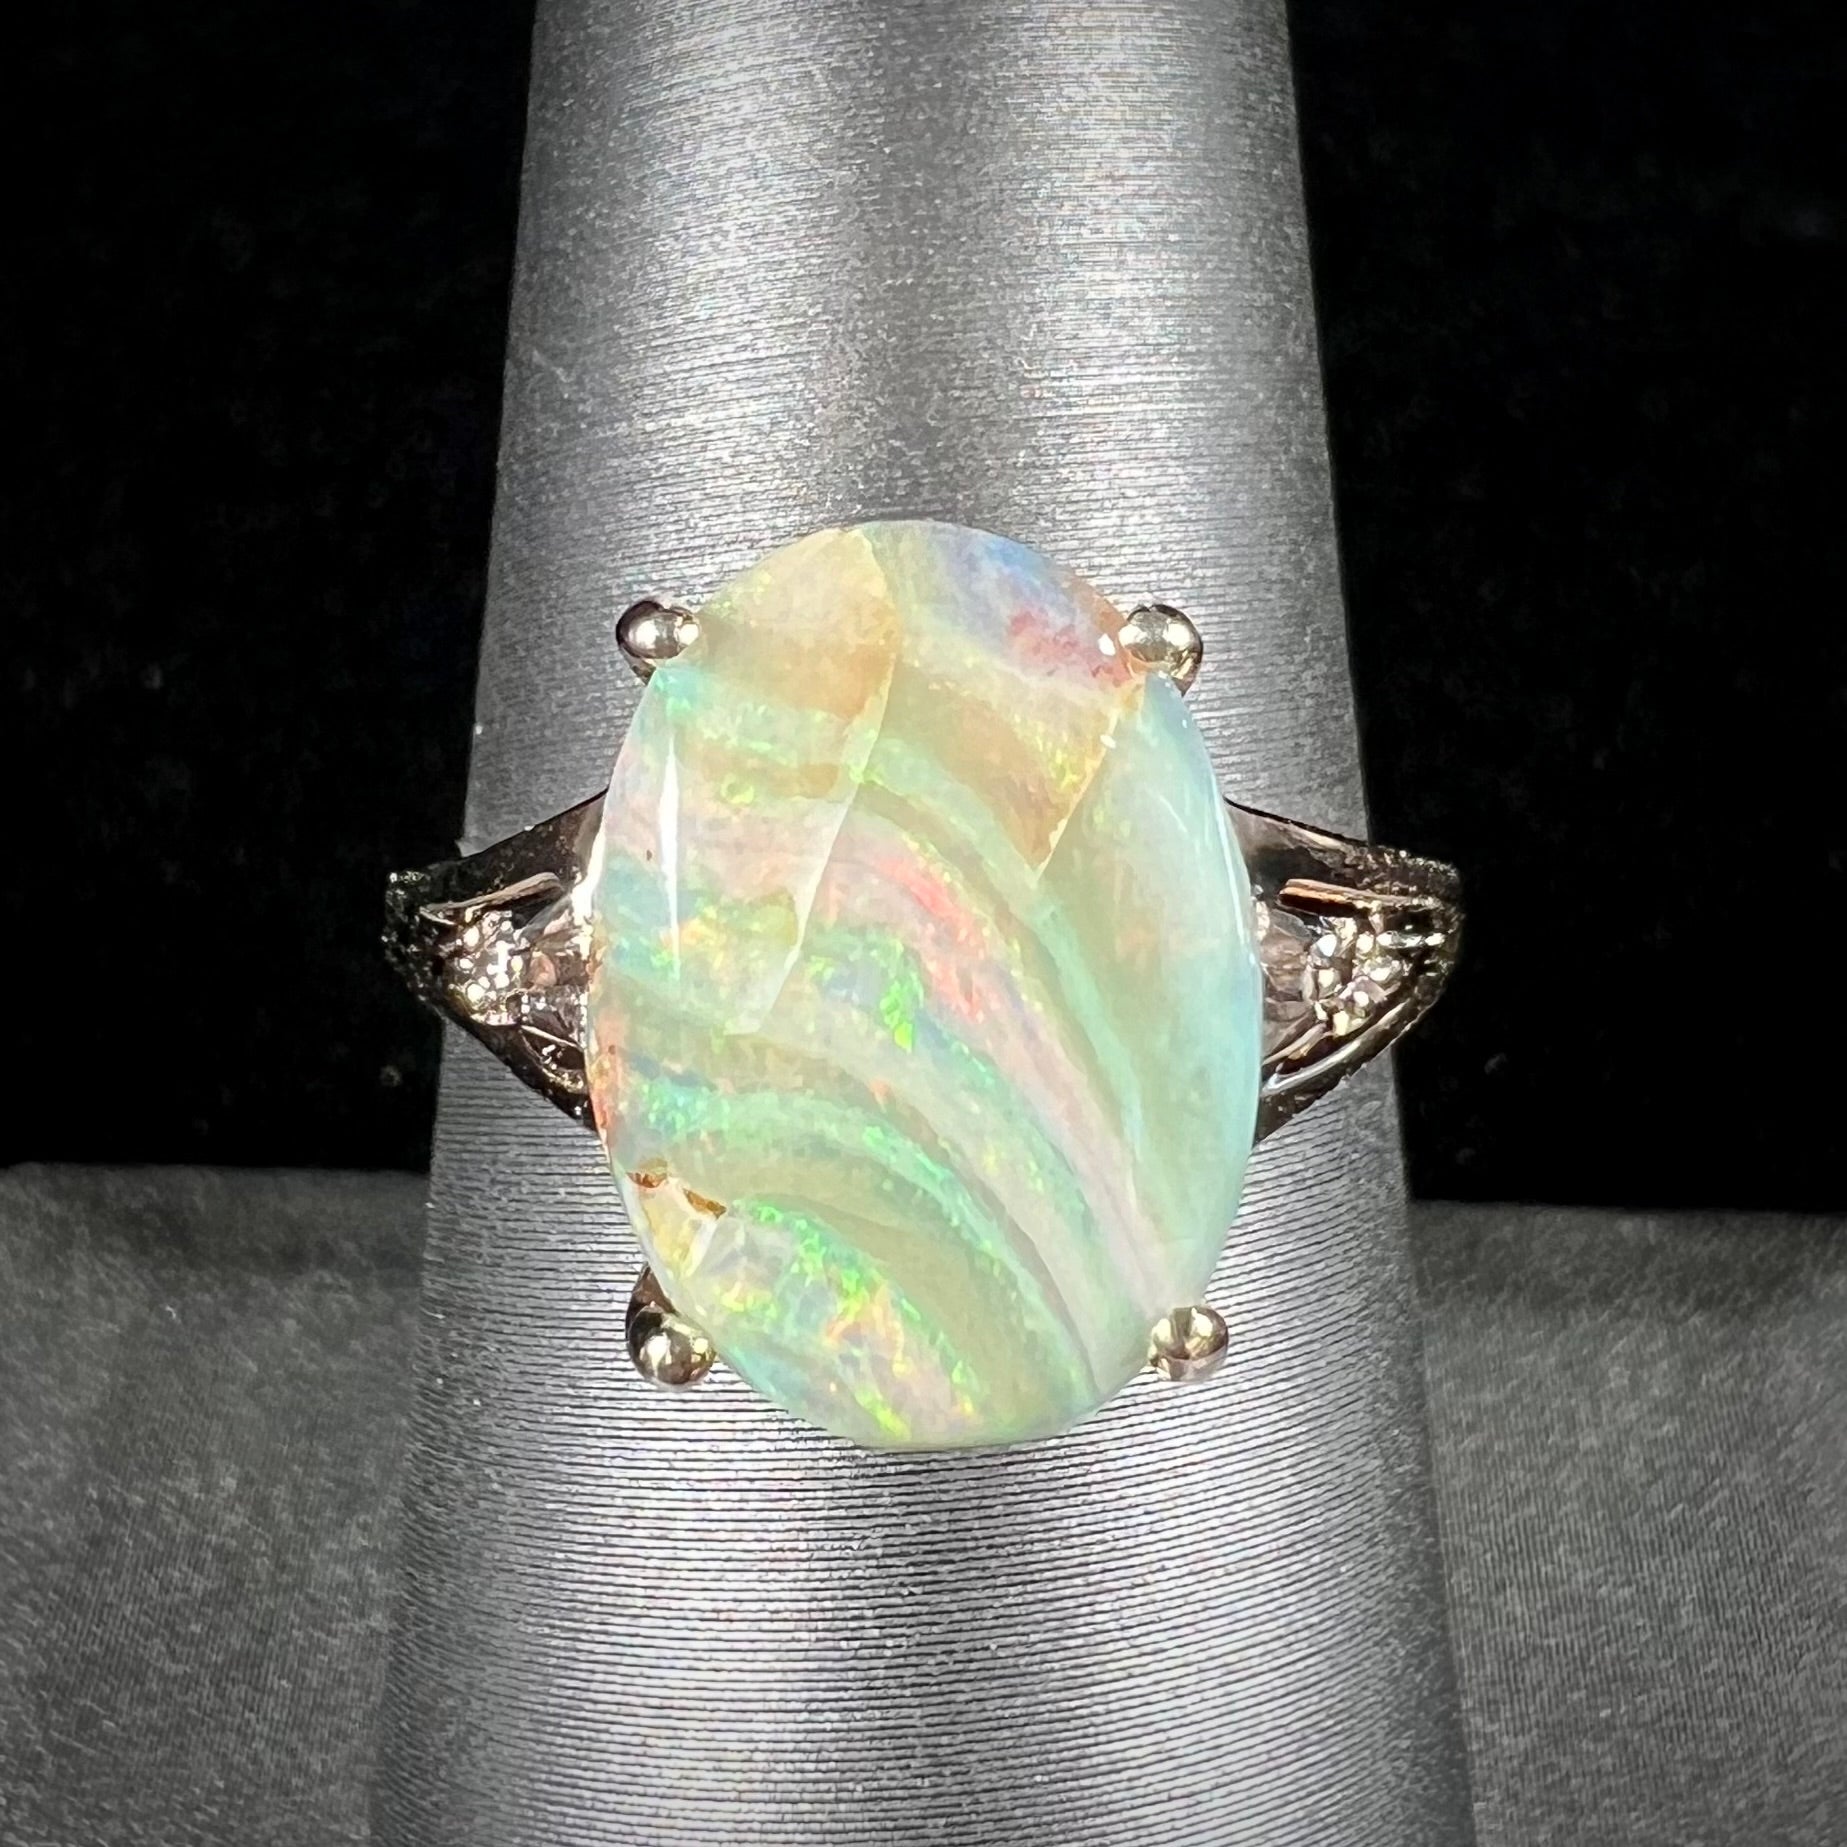 A ladies' Australian boulder opal ring set in yellow gold with diamond accents.  The opal shimmers green and pink and has fissure inclusions.